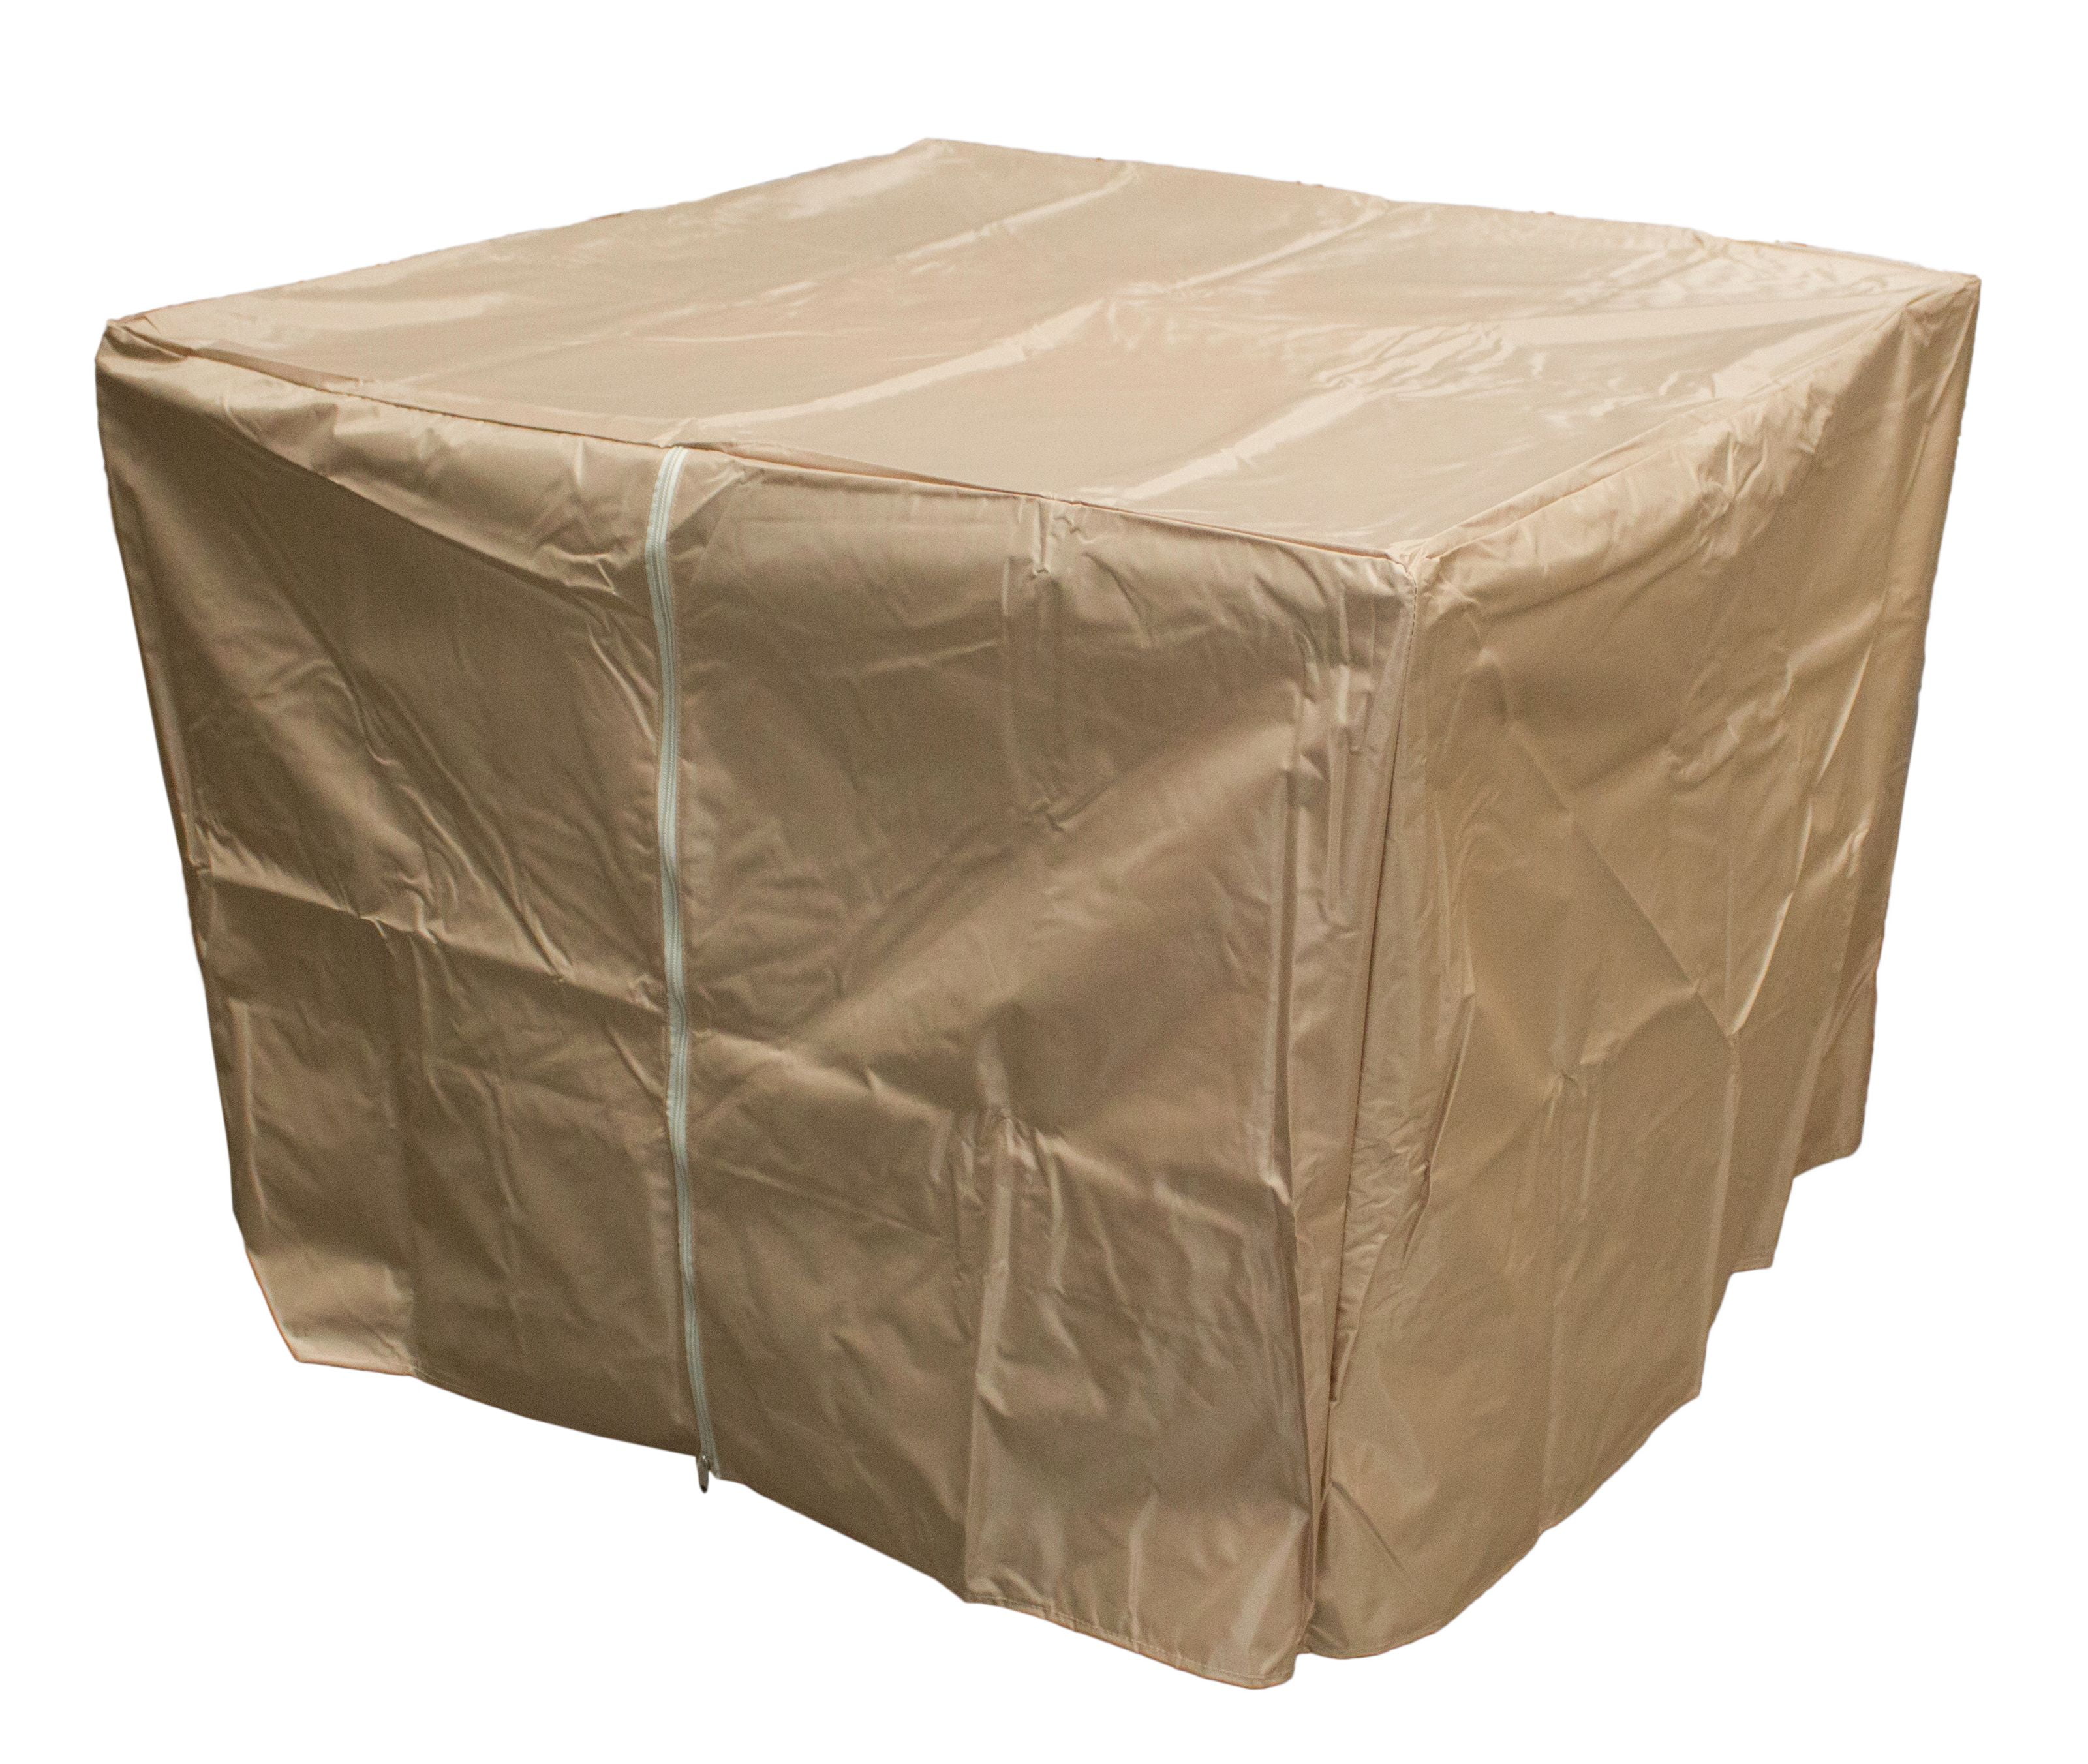 Waterproof Propane Fire Pit Cover, Outdoor Patio Fire Pit Cover